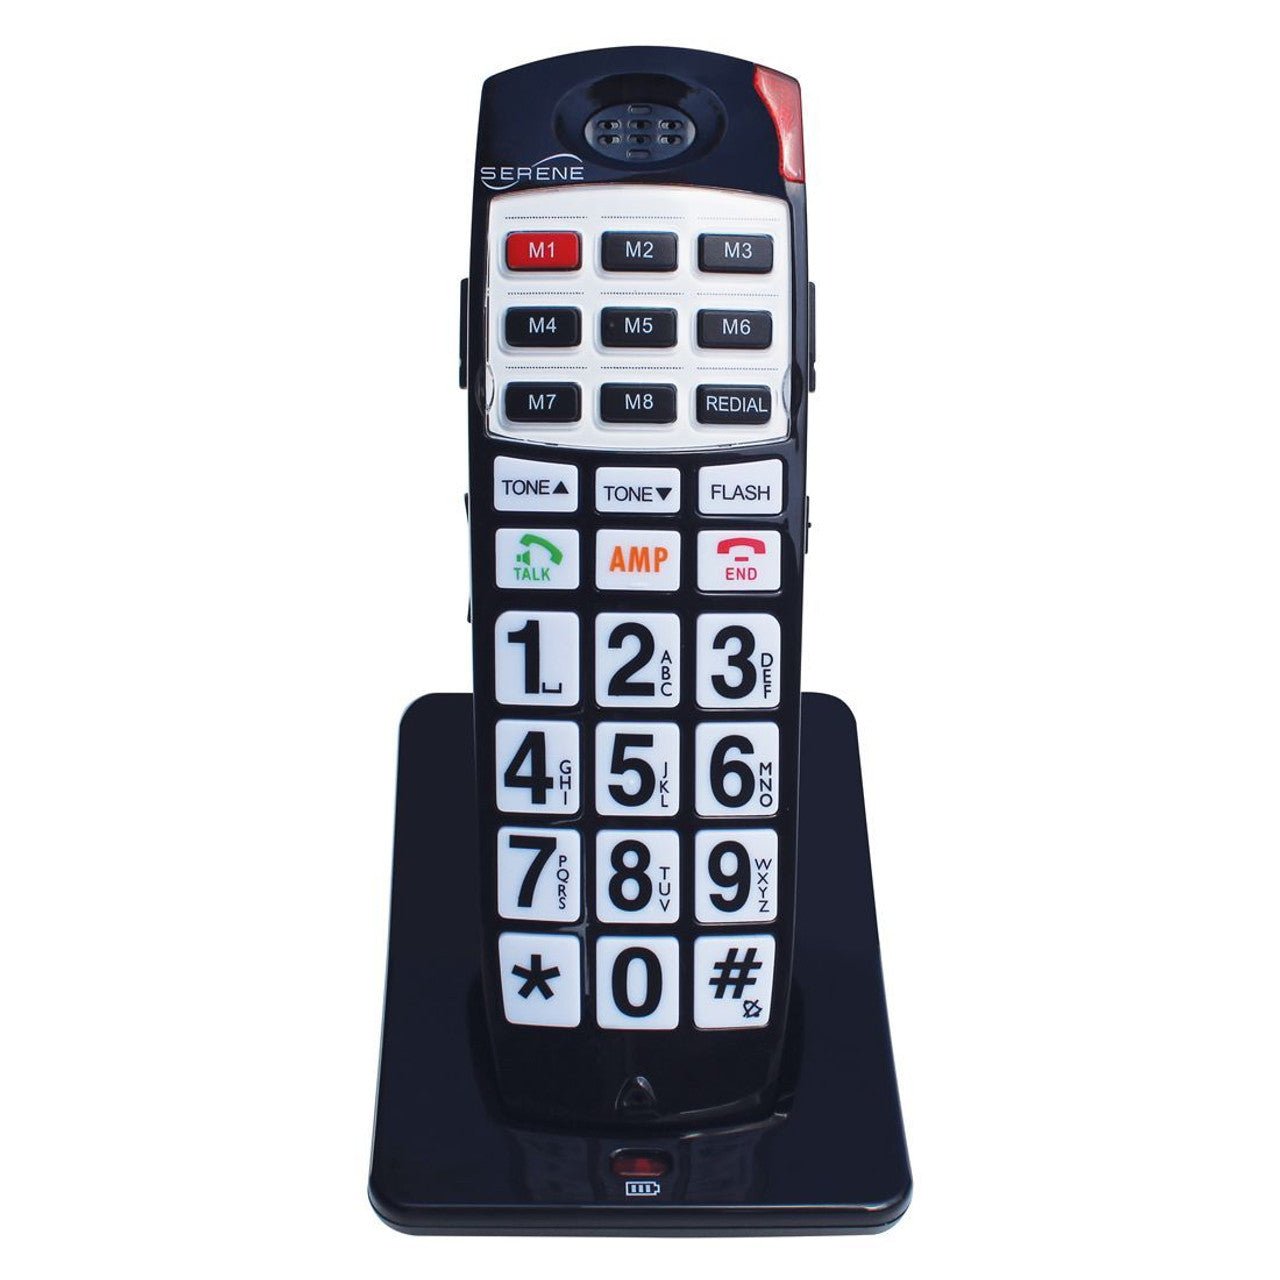 A cordless phone on it's docking station. The phone has large white buttons with black text. It also features an amplify button and 8 qucik dial buttons